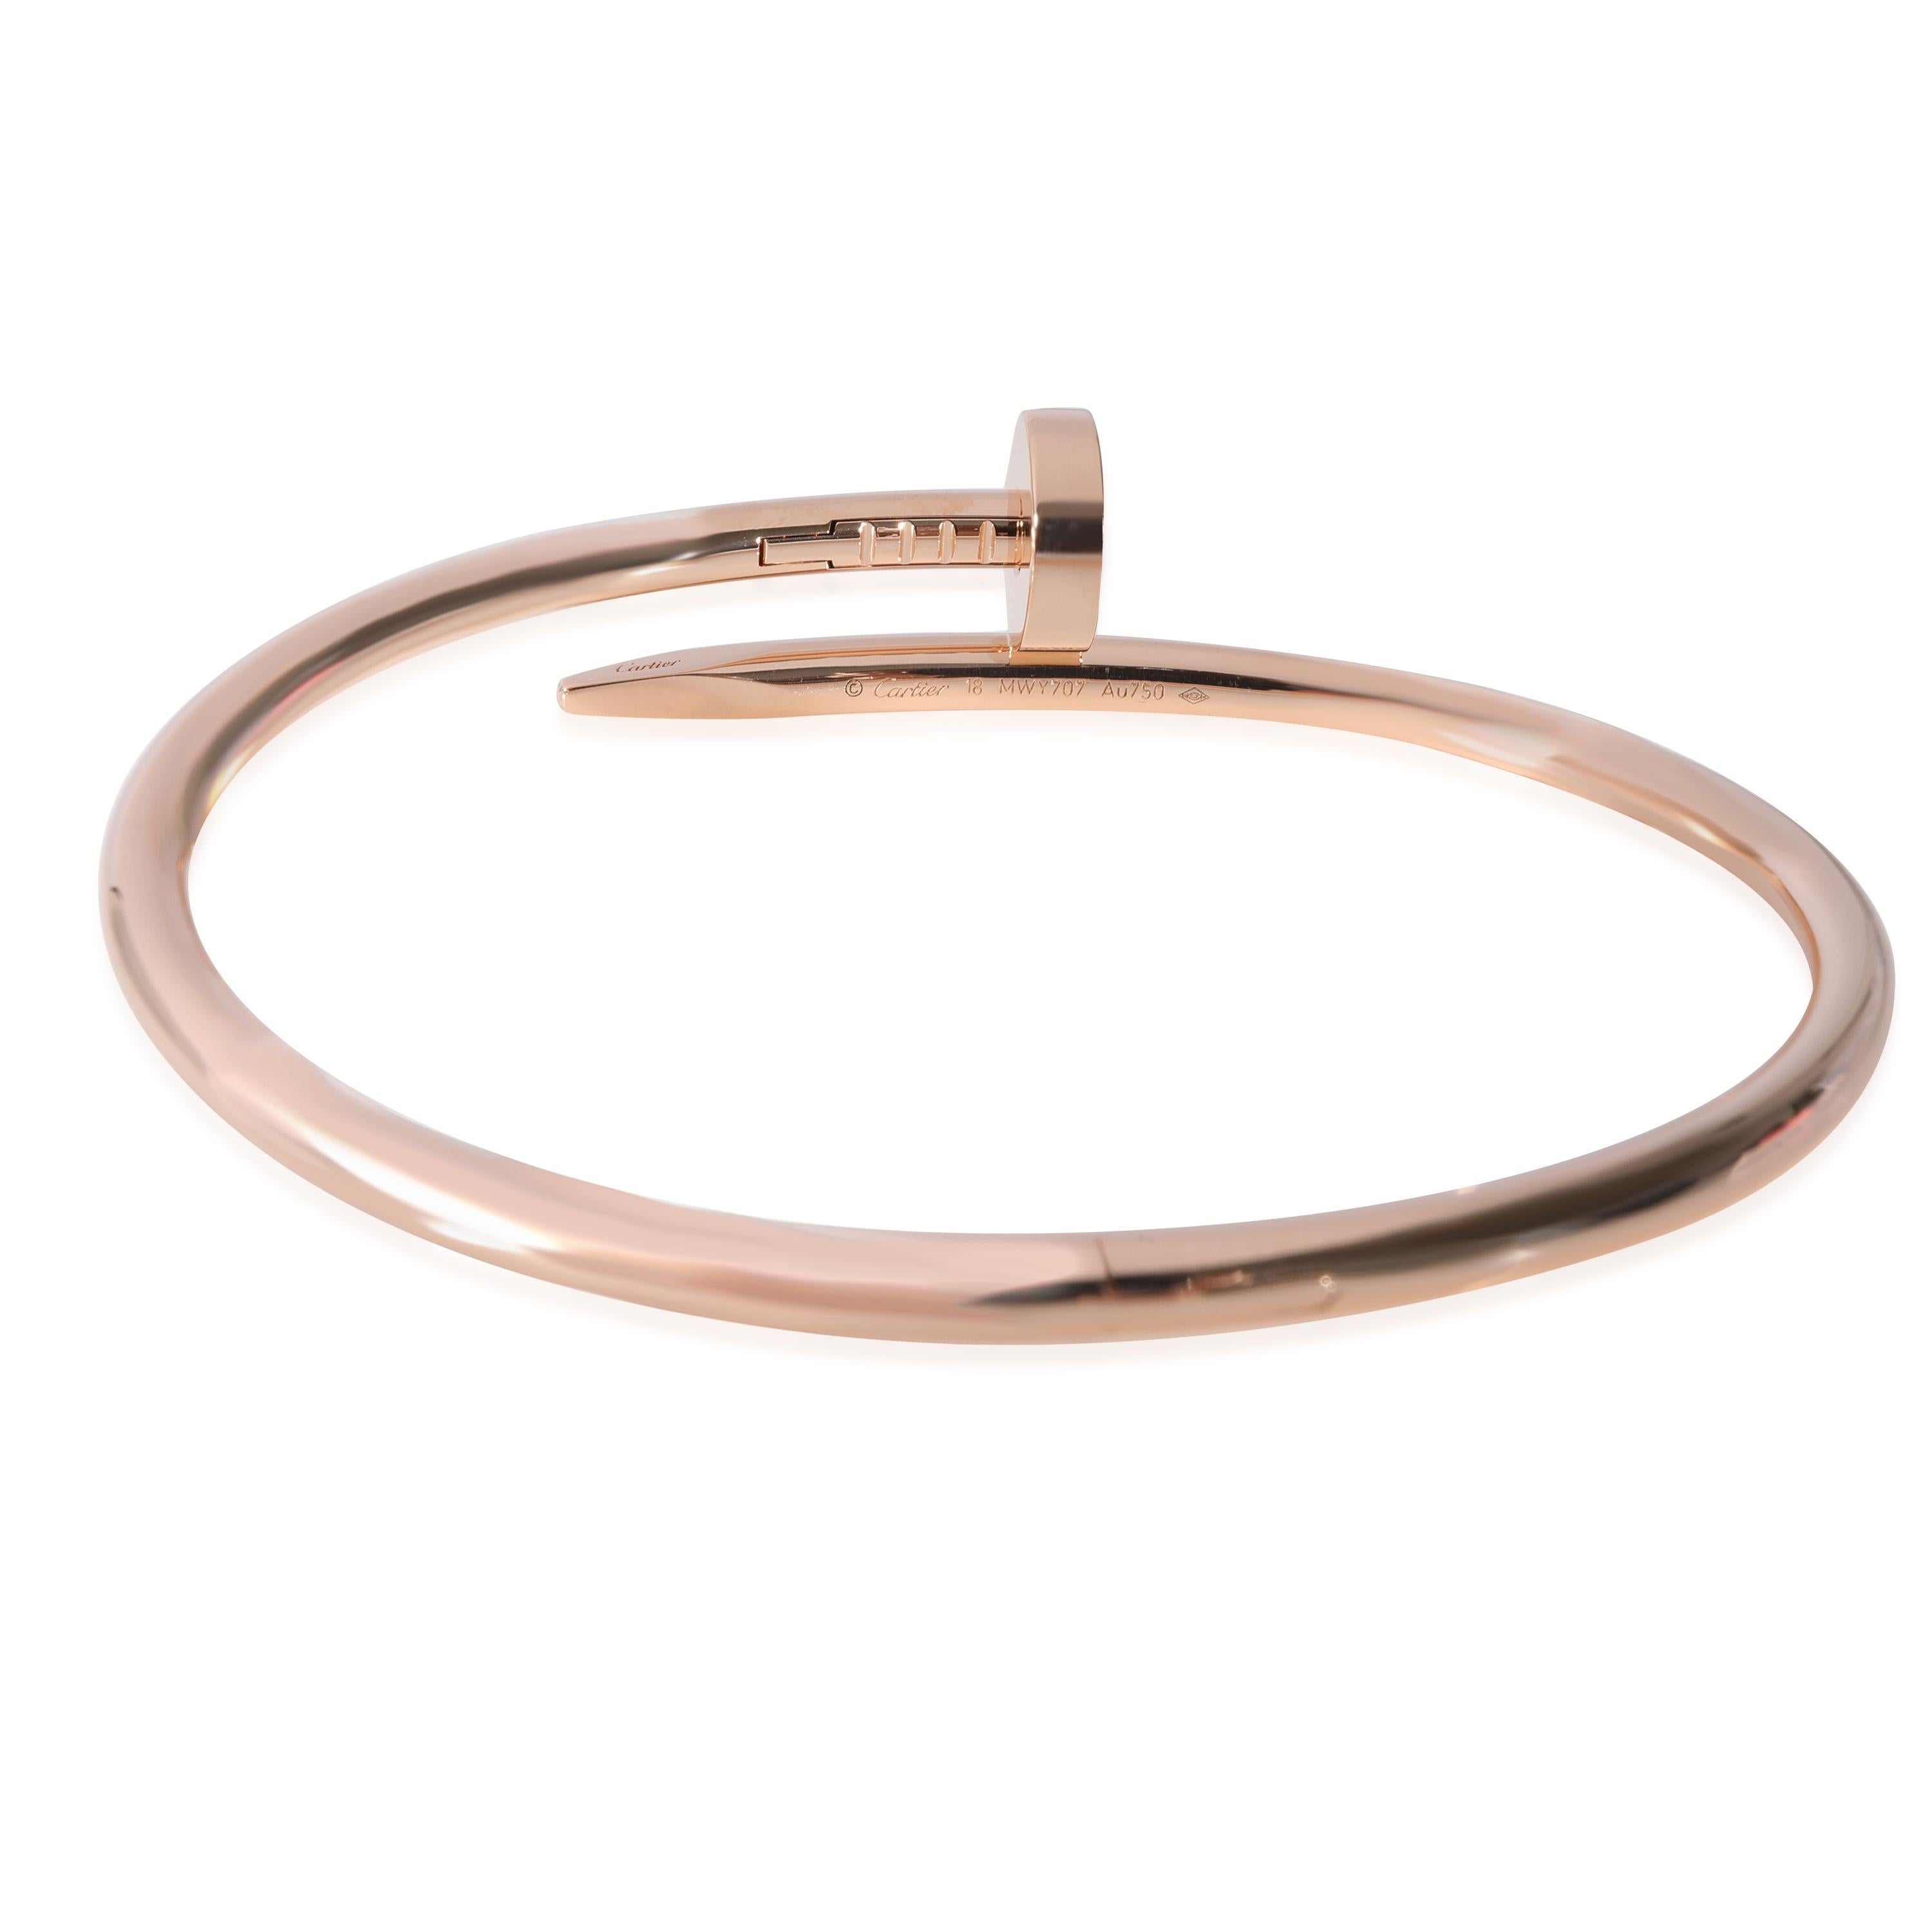 Cartier Juste Un Clou Bracelet in 18k Rose Gold

PRIMARY DETAILS
SKU: 125465
Listing Title: Cartier Juste Un Clou Bracelet in 18k Rose Gold
Condition Description: Retails for 7500 USD. In excellent condition and recently polished. 18 inches in